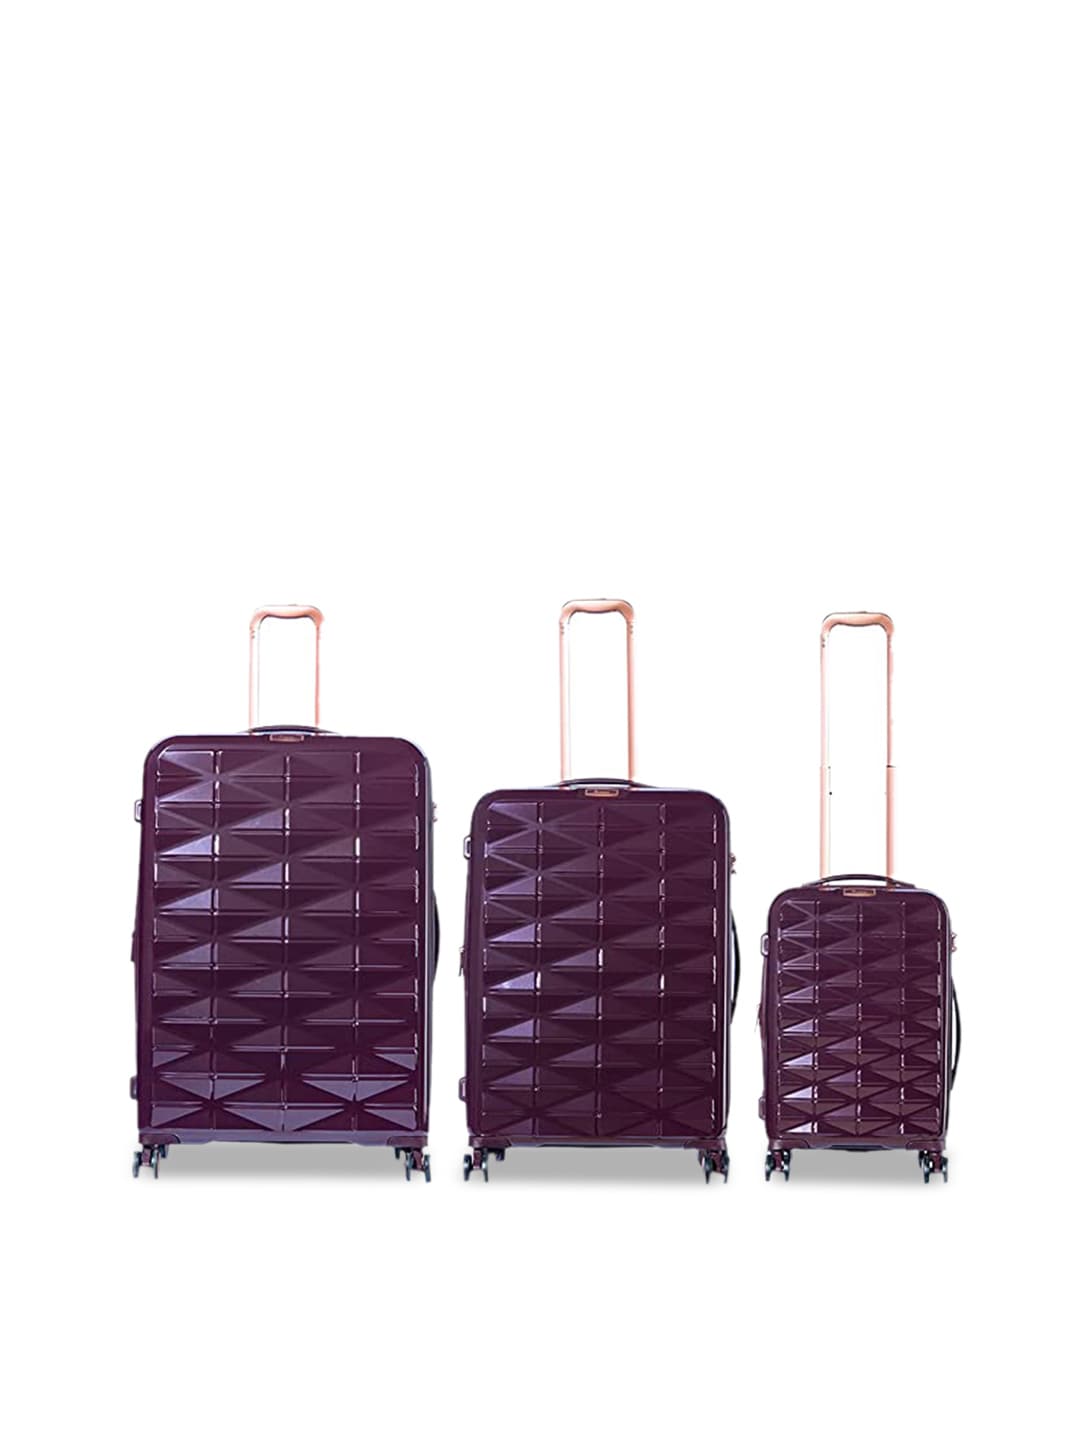 IT luggage Set Of 3  Purple Textured Hard-Sided Trolley Bag Price in India